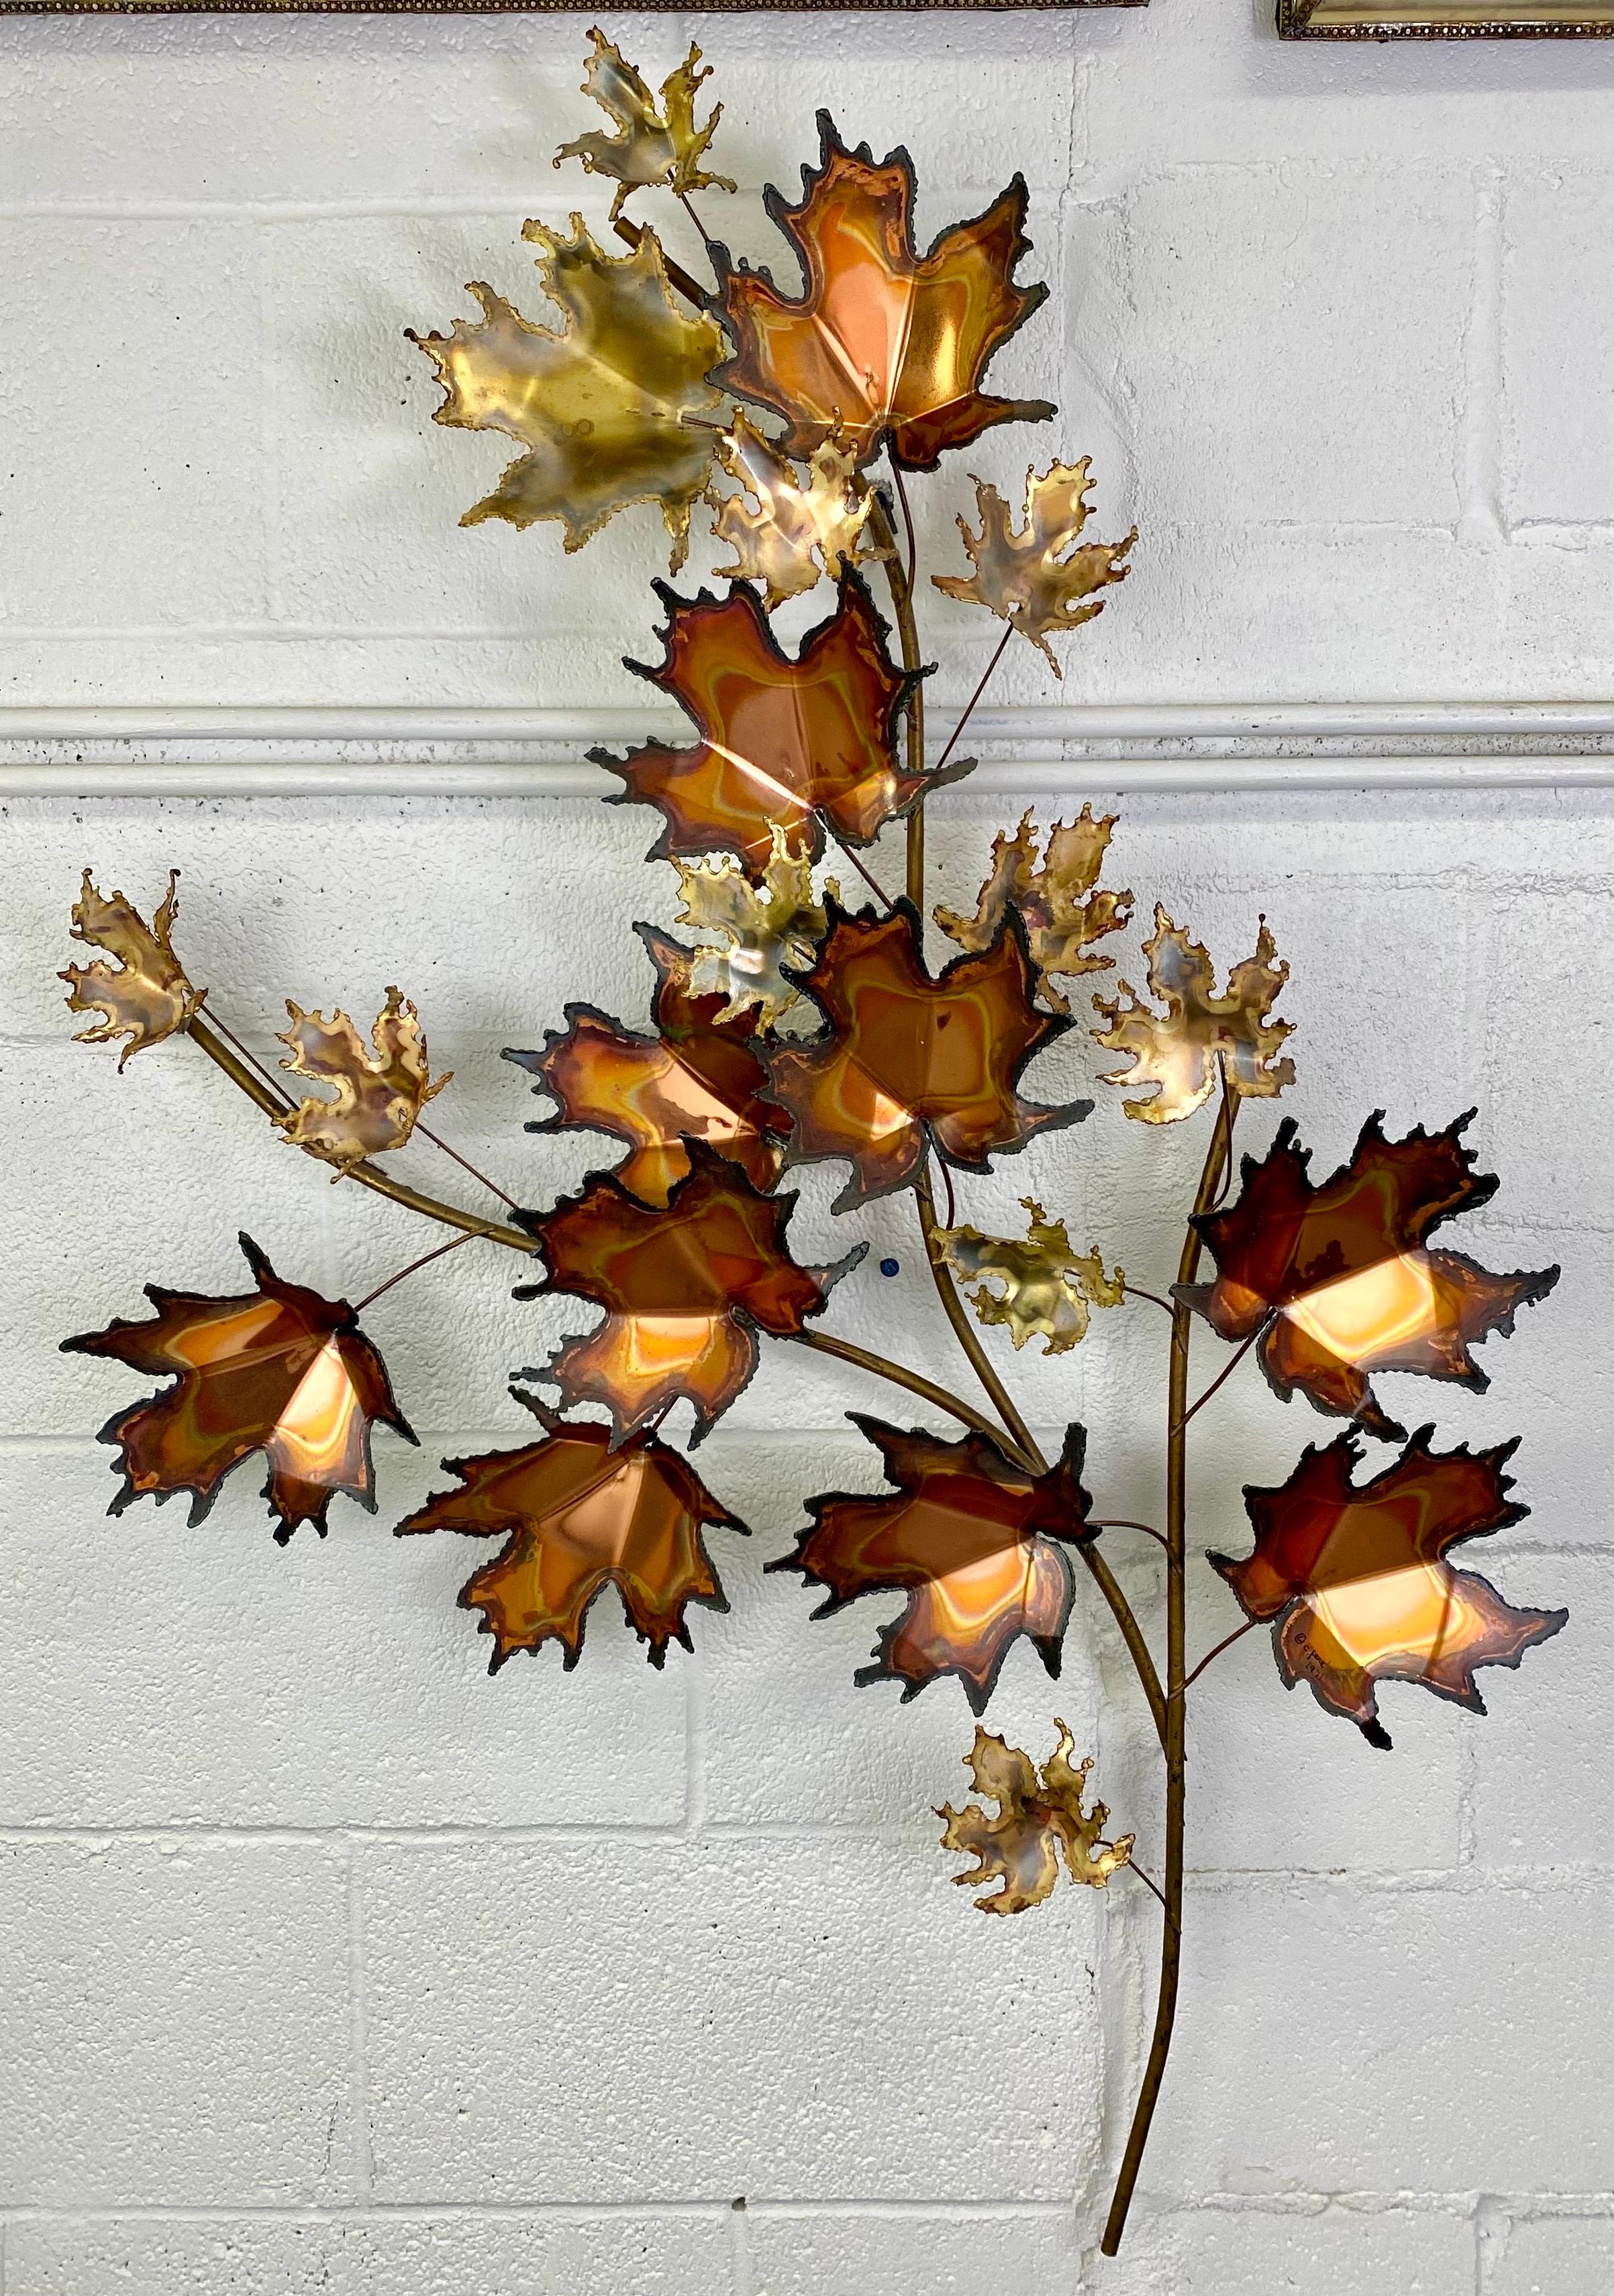 A beautiful Mid-Century Modern maple leaf design wall sculpture by Curtis Jere. The brutalist style leaf is handmade of quality bronze and brass. The large wall decor MCM sculpture shows beautiful patina on each leaf adding charm and elegance to its